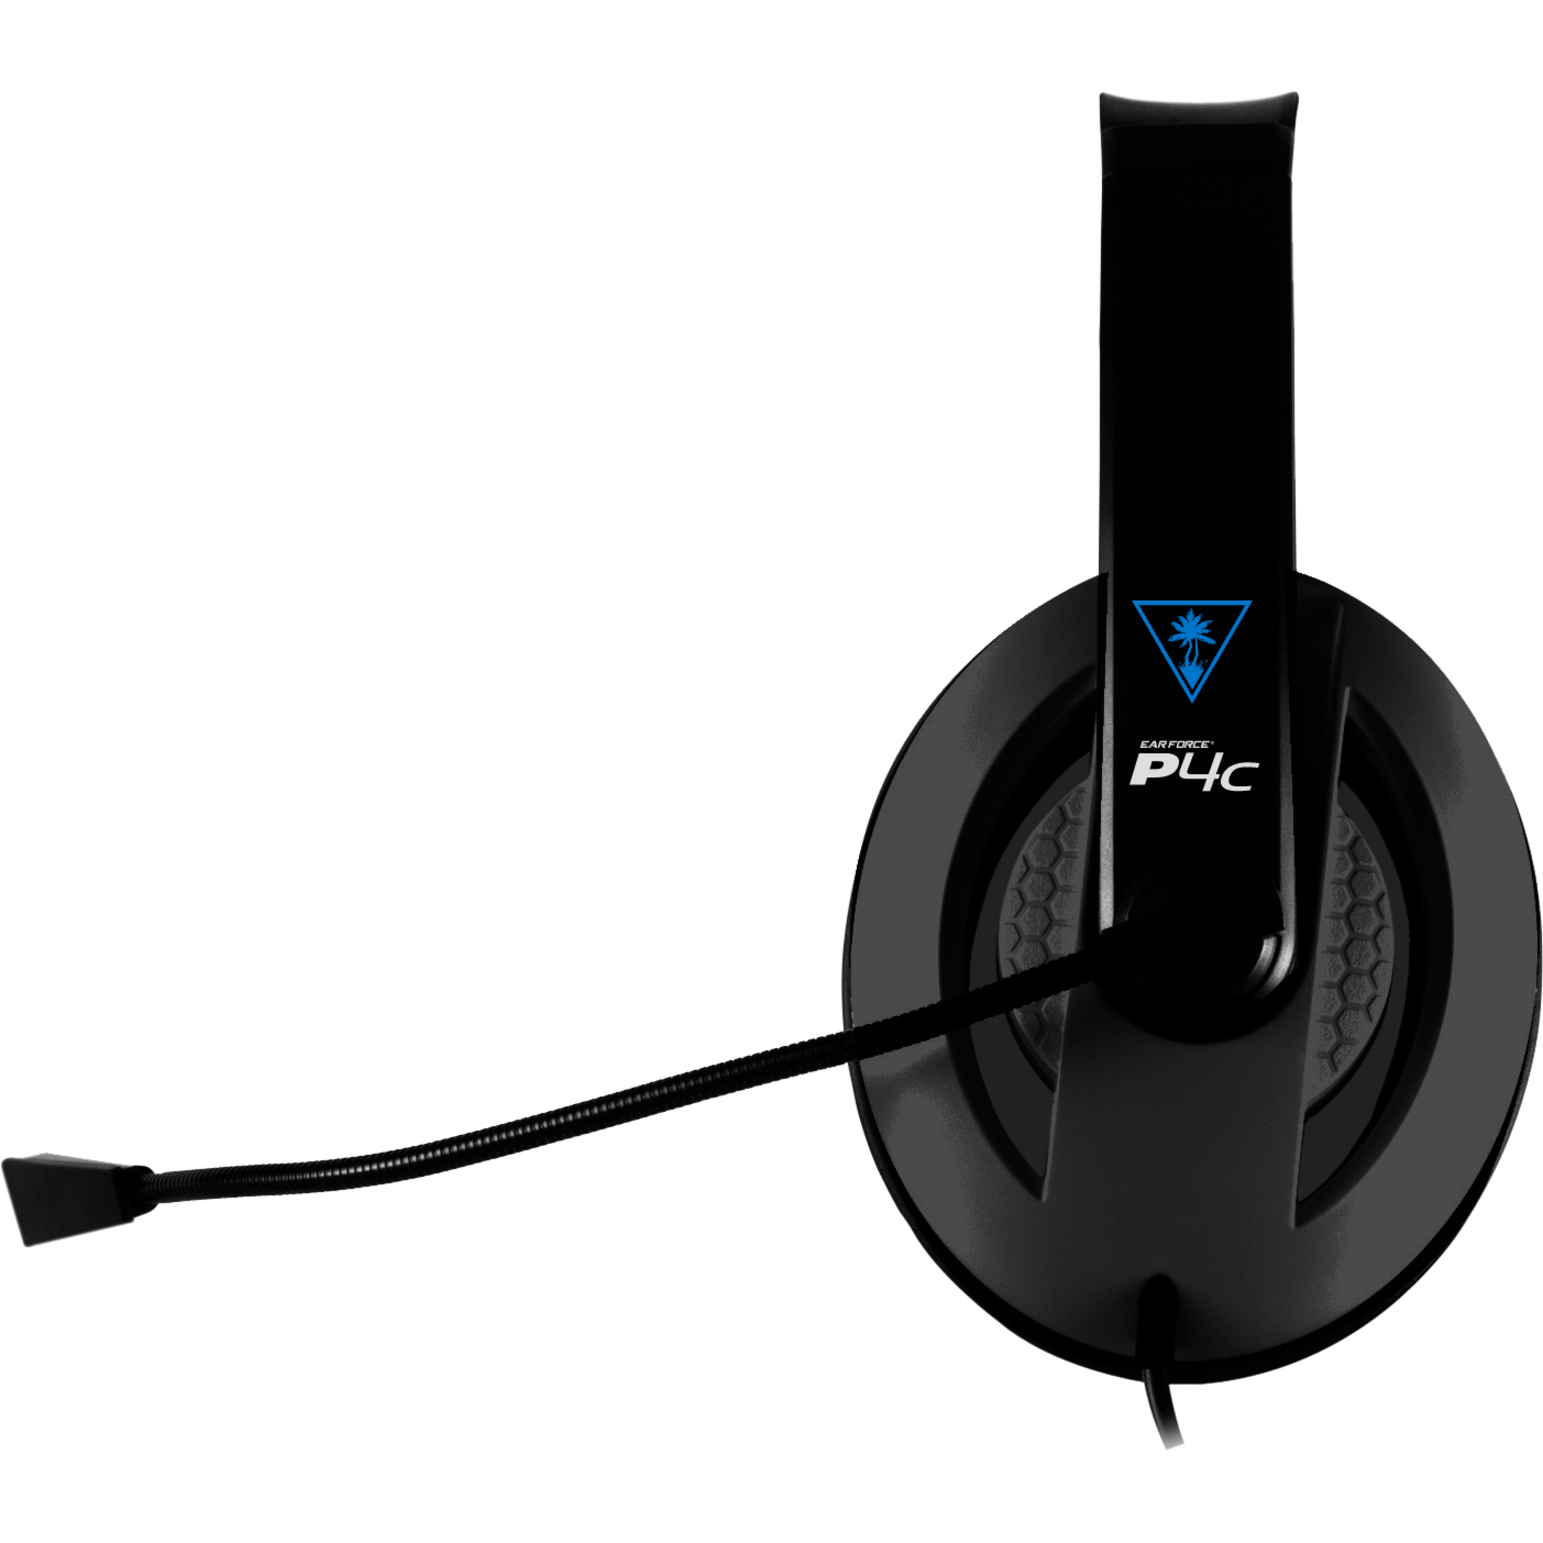 Turtle Beach Ear Force P4c Chat Communicator - Headset - full size - image 3 of 4